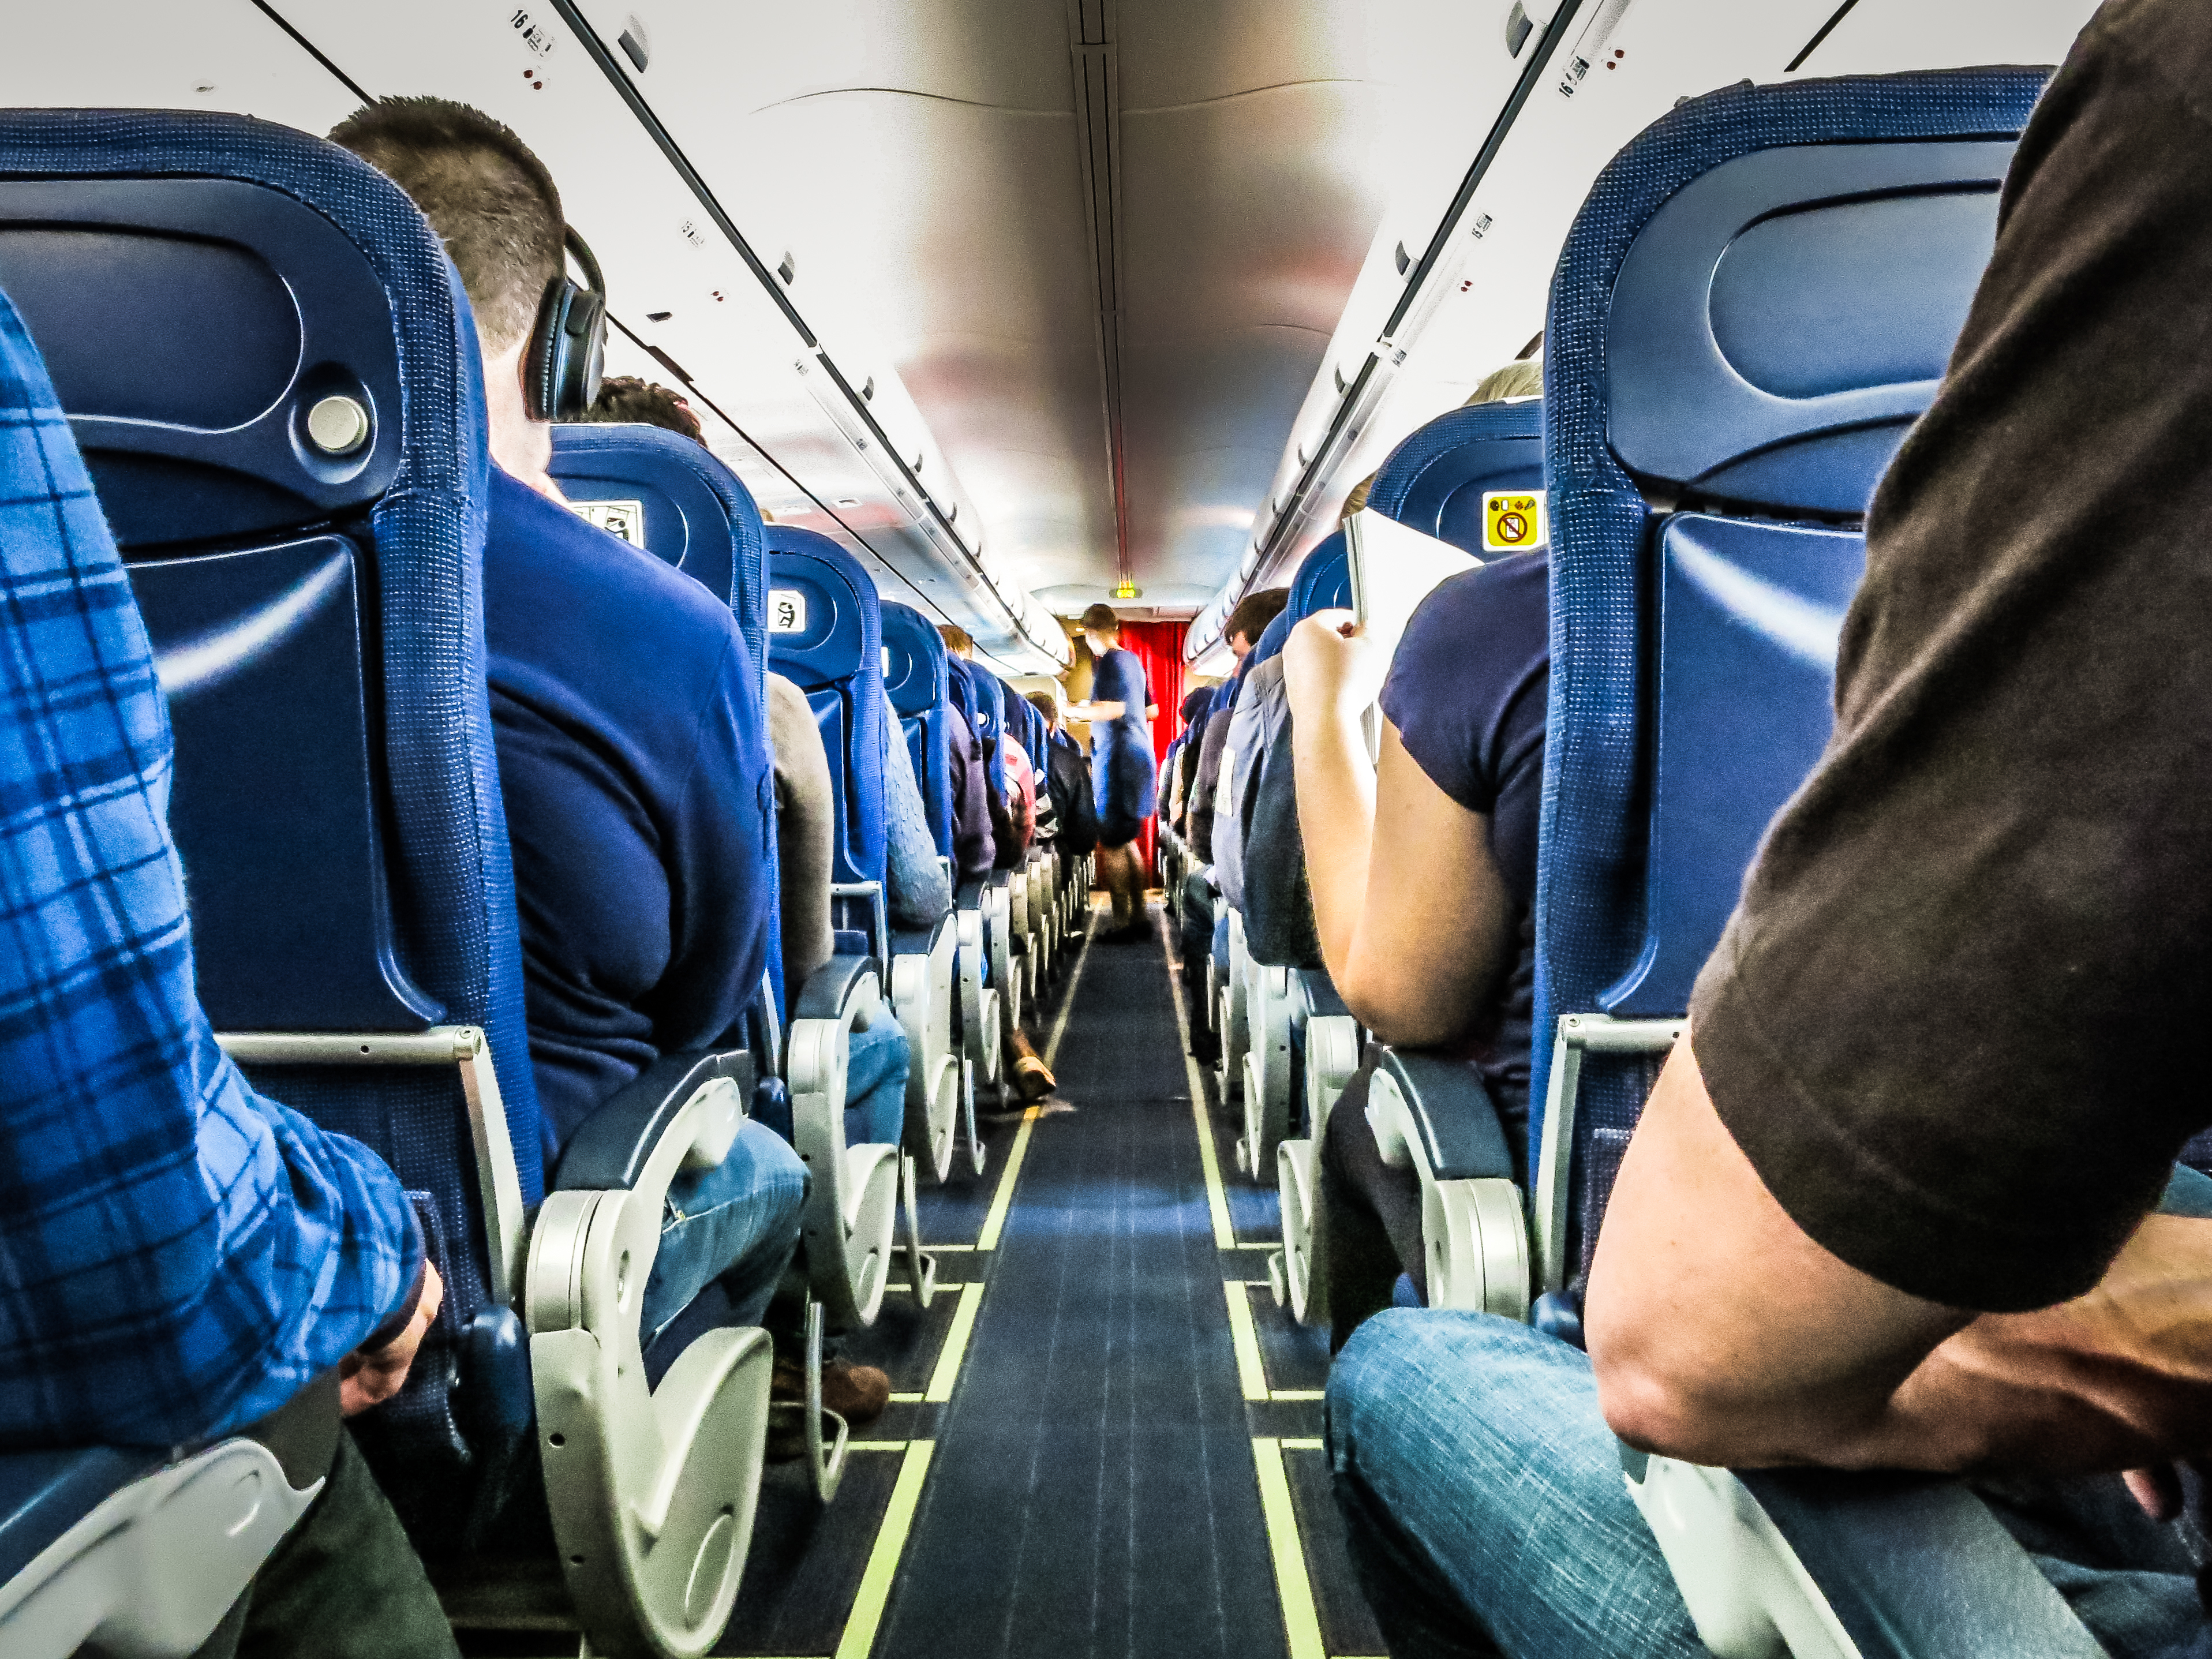 Airplane Etiquette: Rules for Flying on ...rd.com